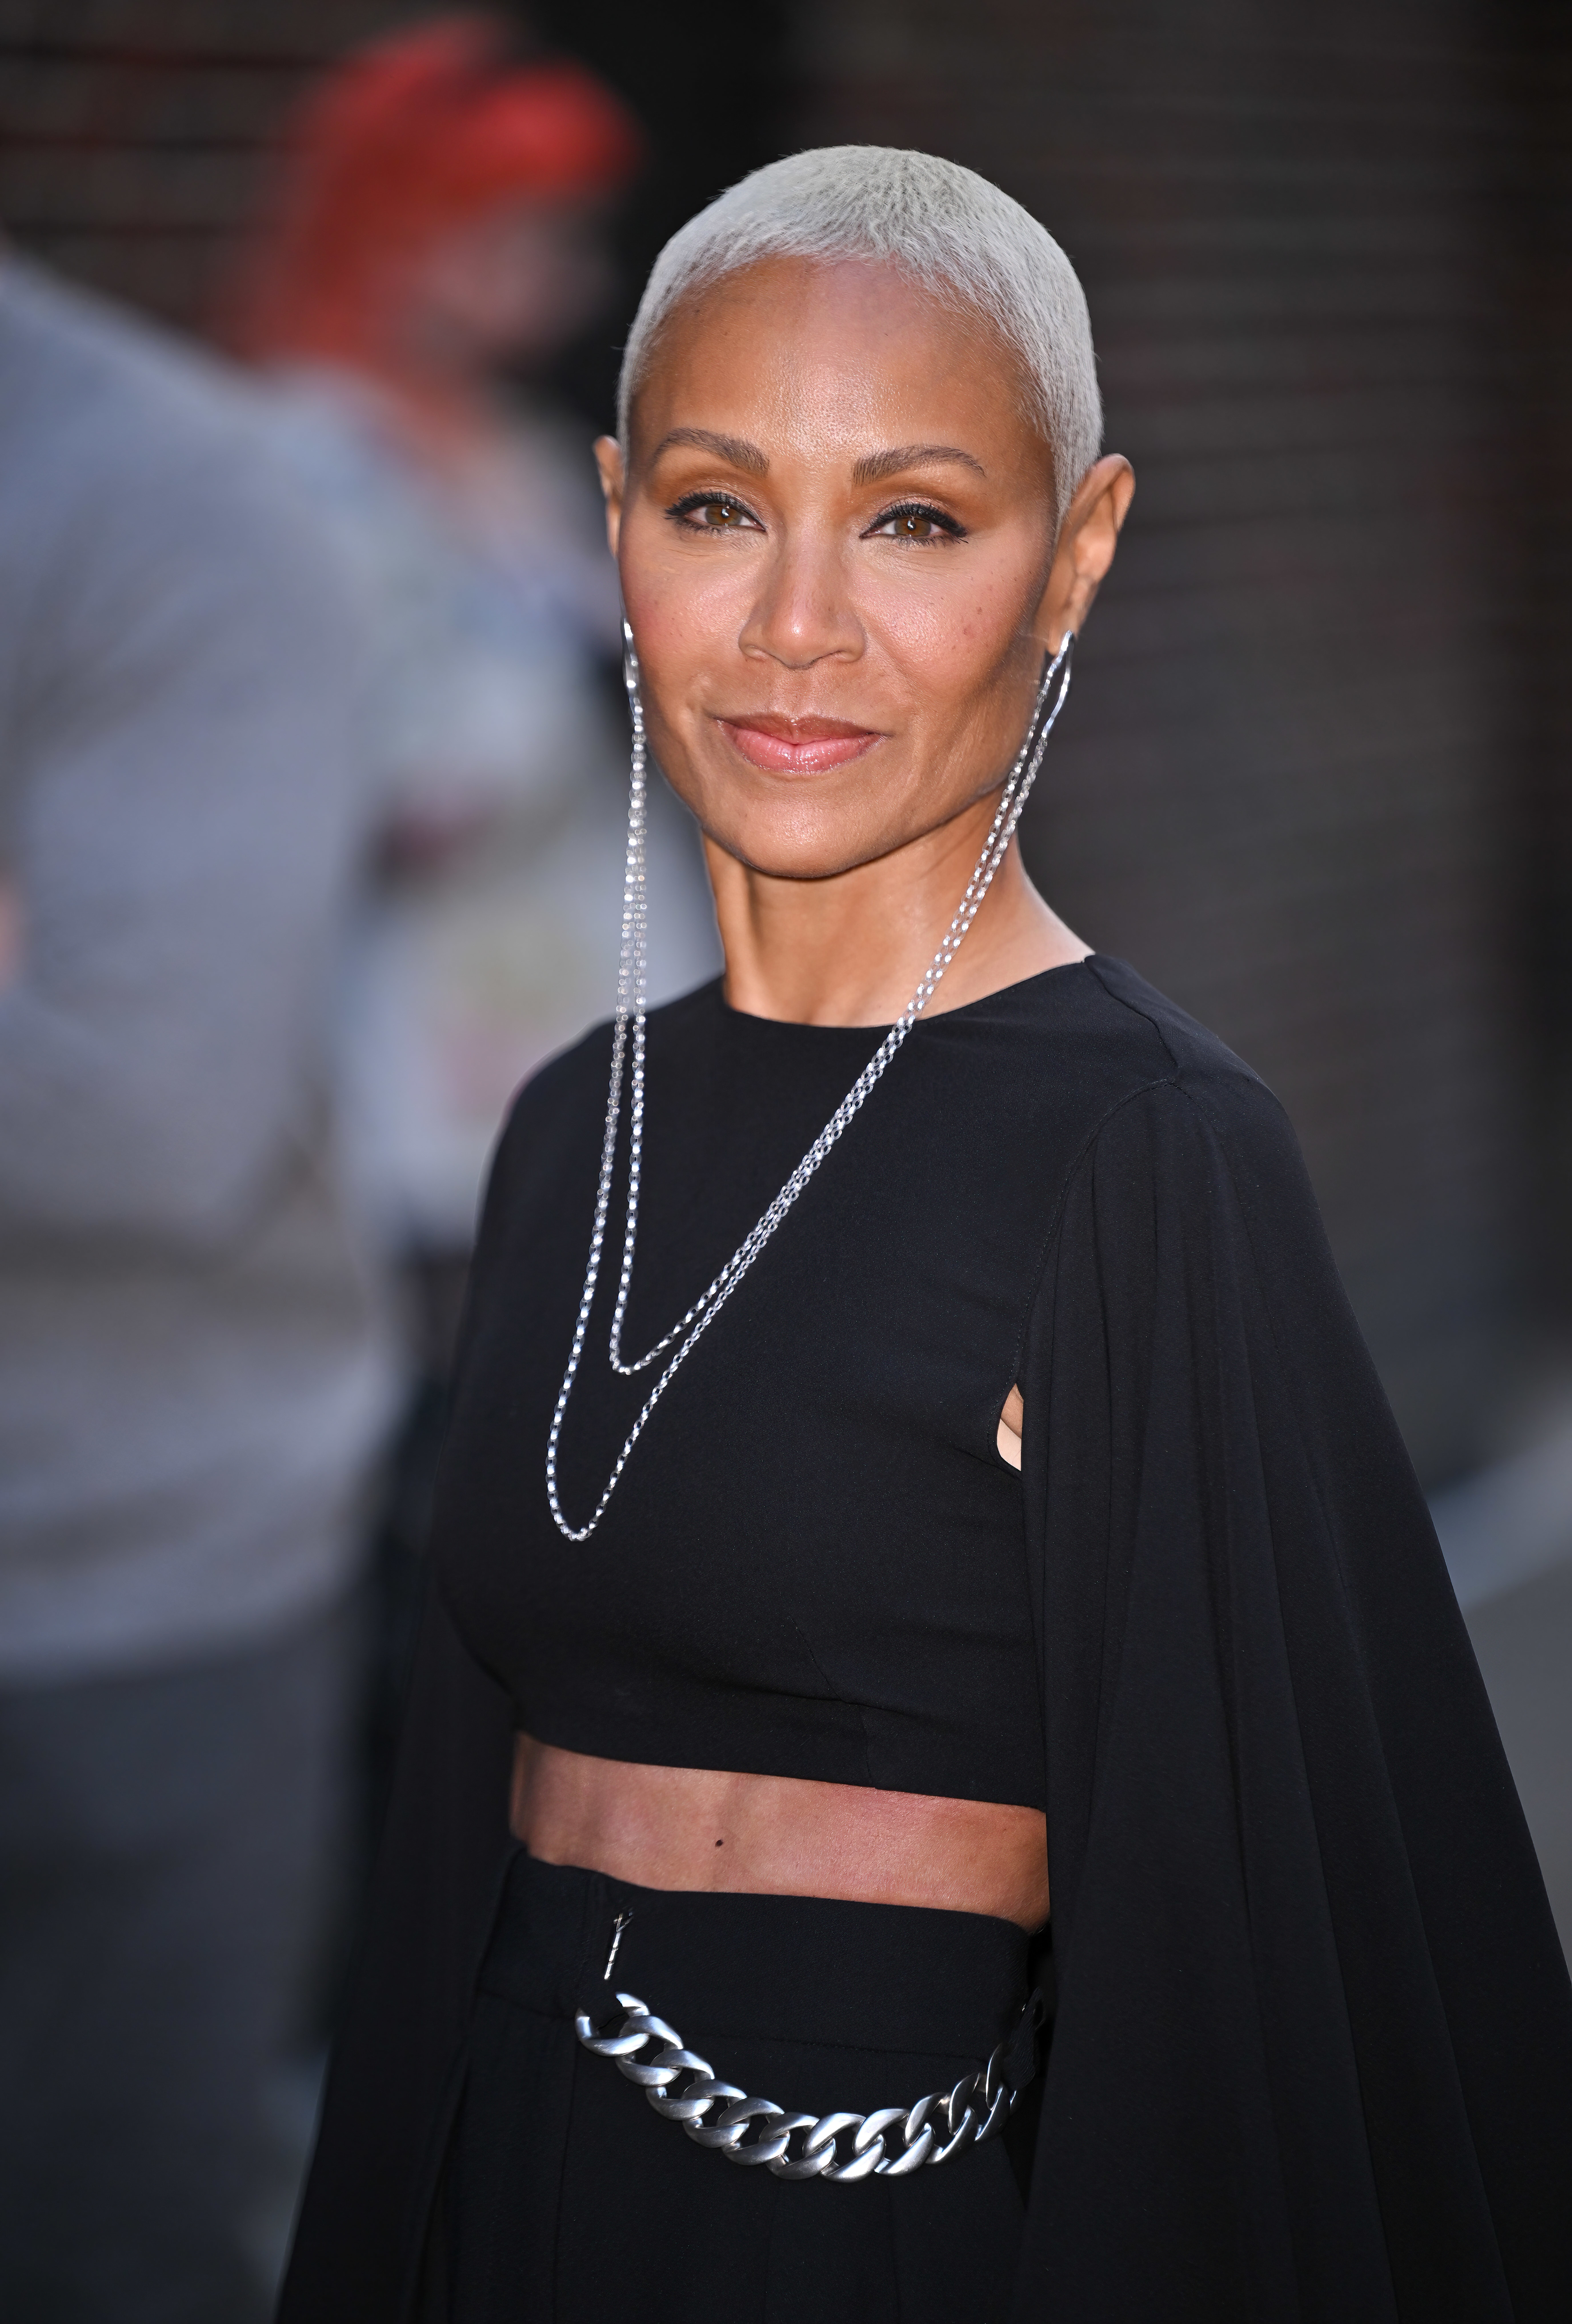 Jada wearing a black outfit with a chain belt and draped sleeves, at an event